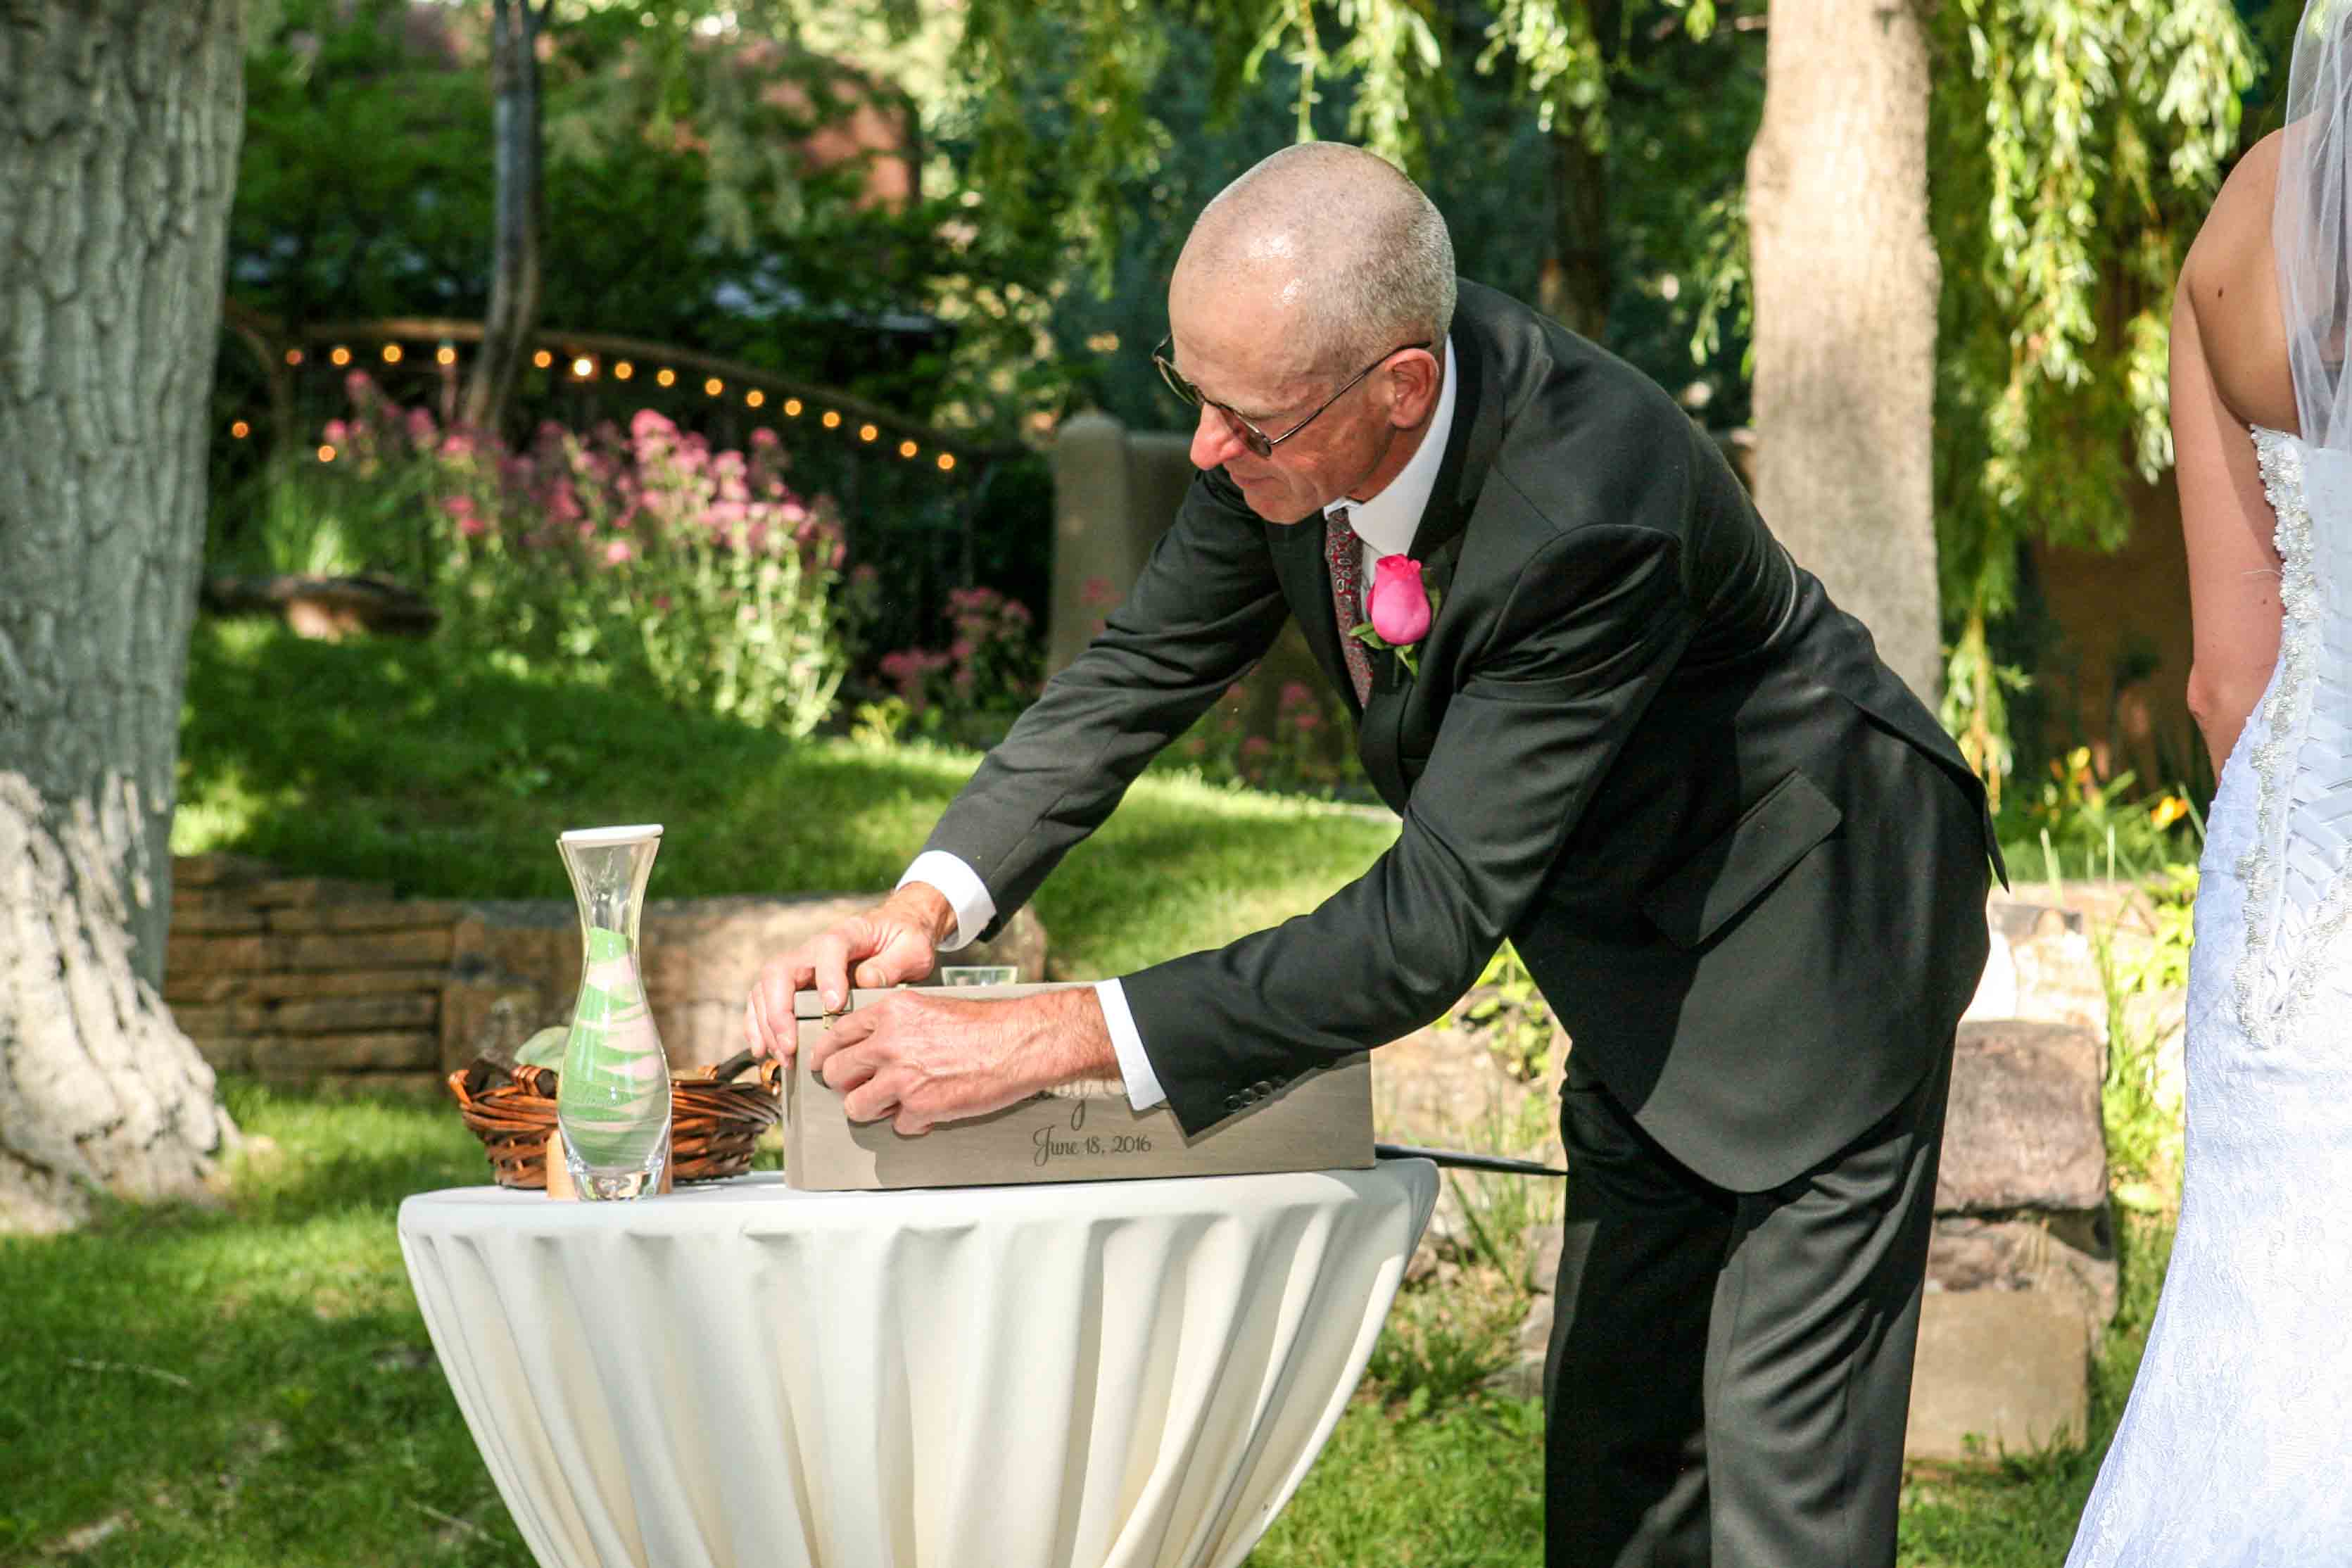 Taos wedding minister sealing the Wine Box at the ceremony conclusion.